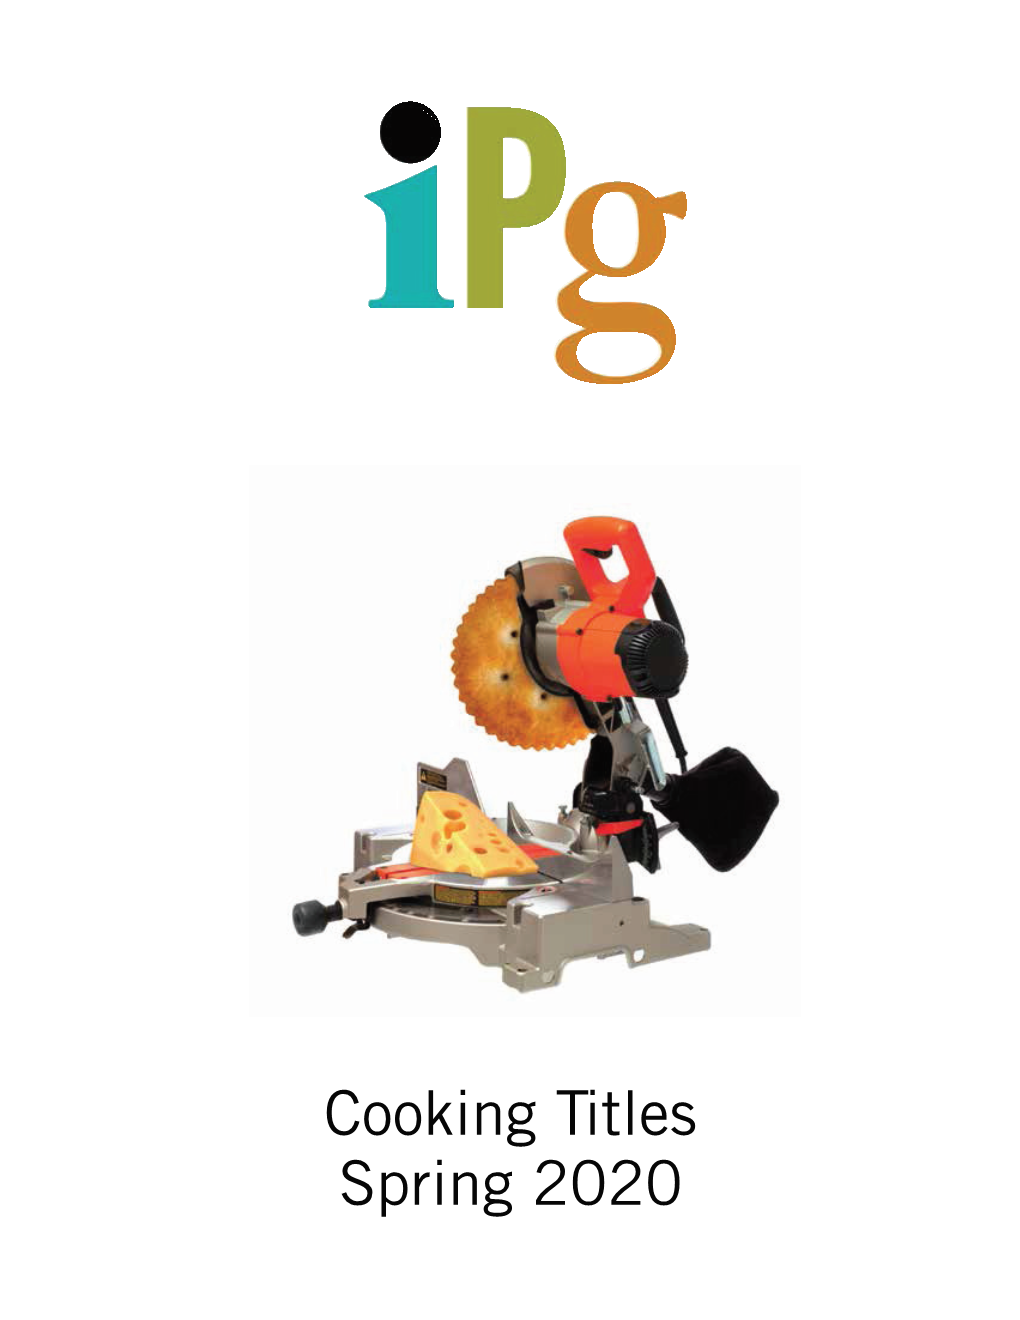 IPG Spring 2020 Cooking Titles - January 2020 Page 1